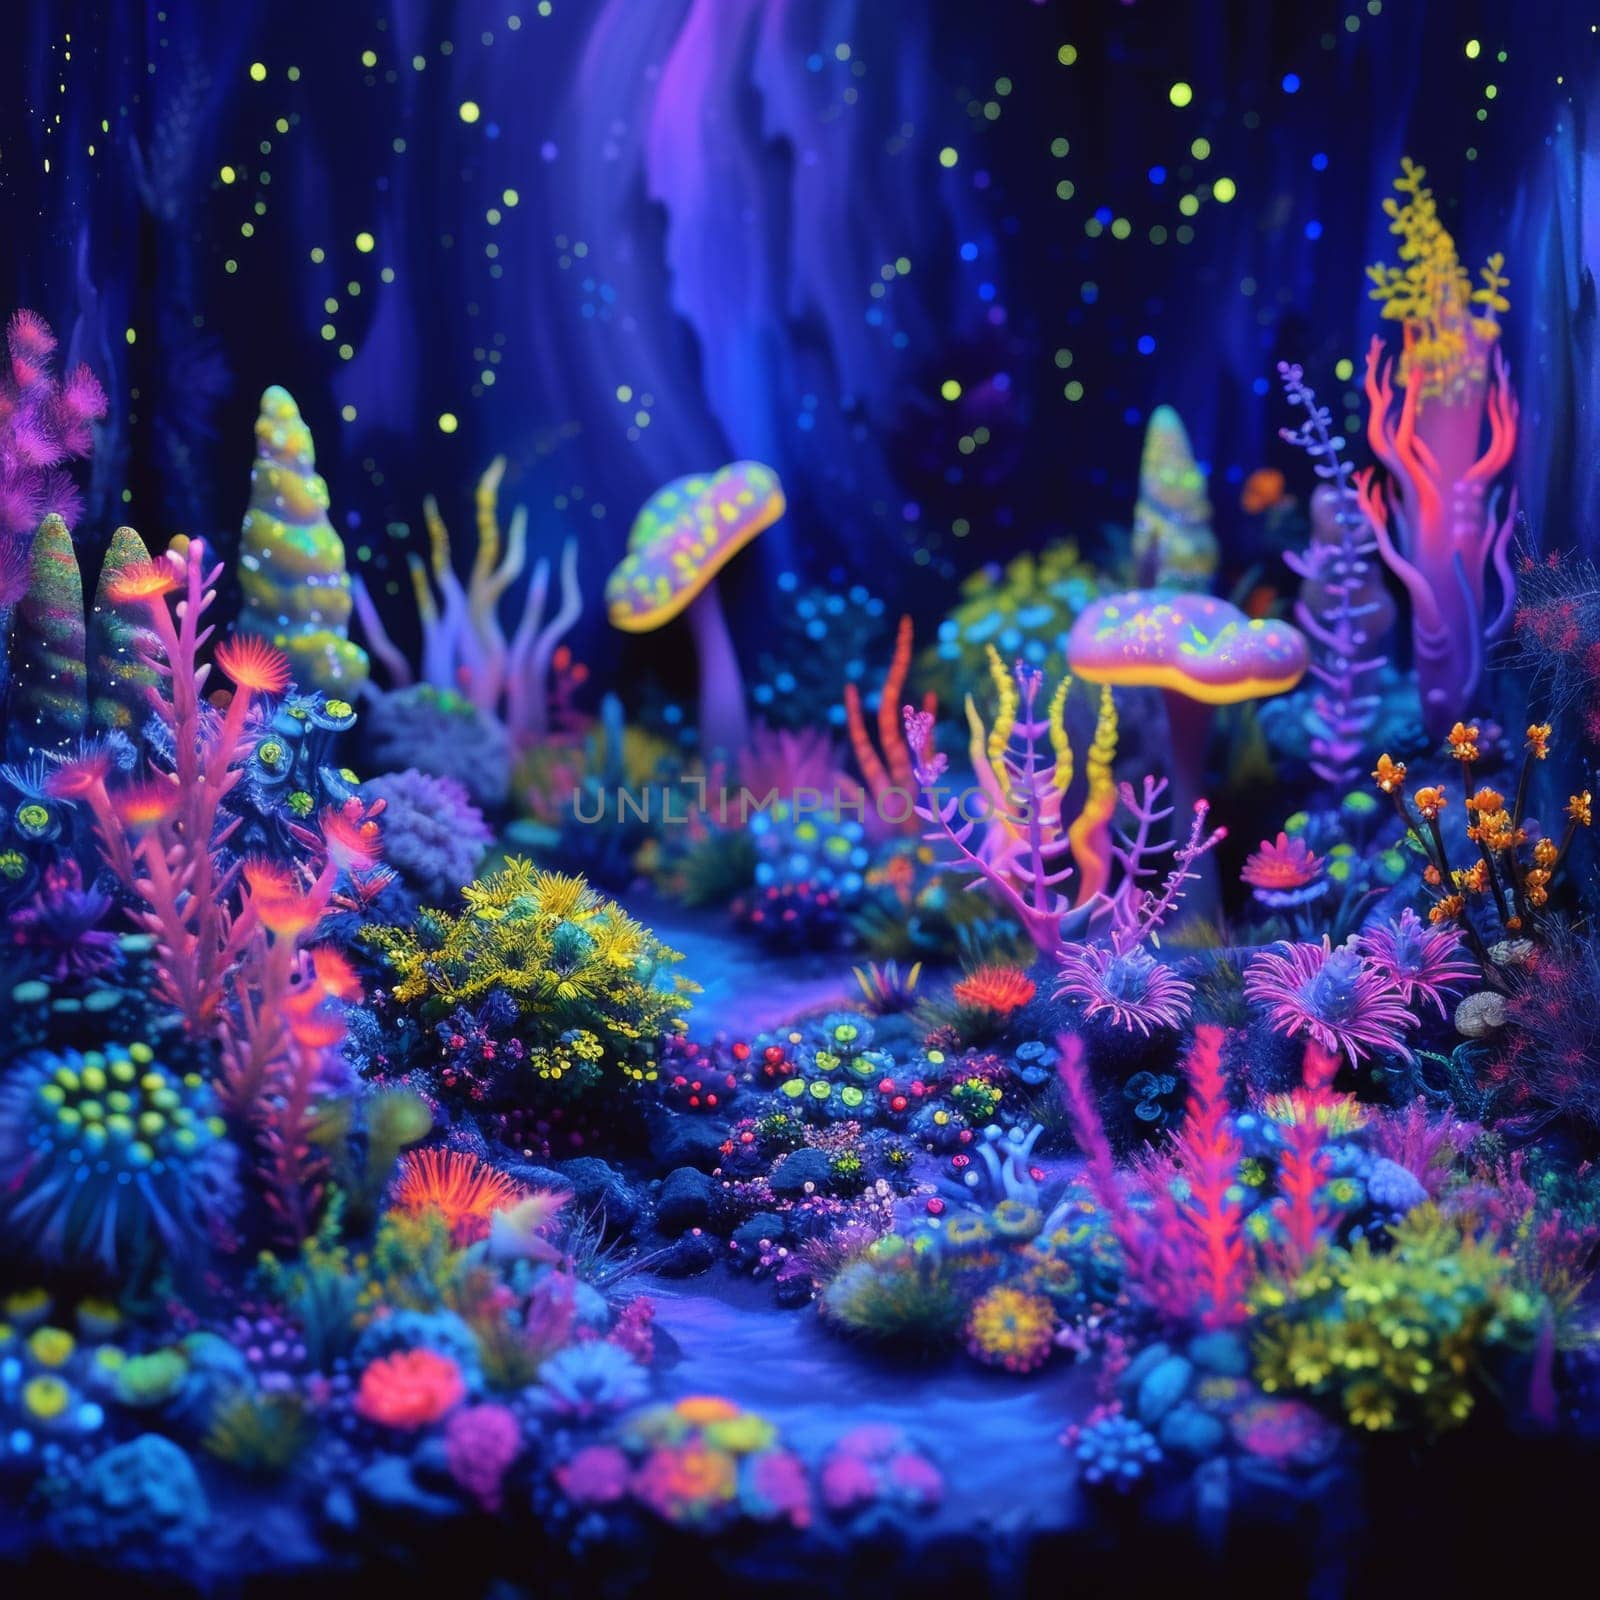 A painting of a colorful underwater scene with mushrooms and plants